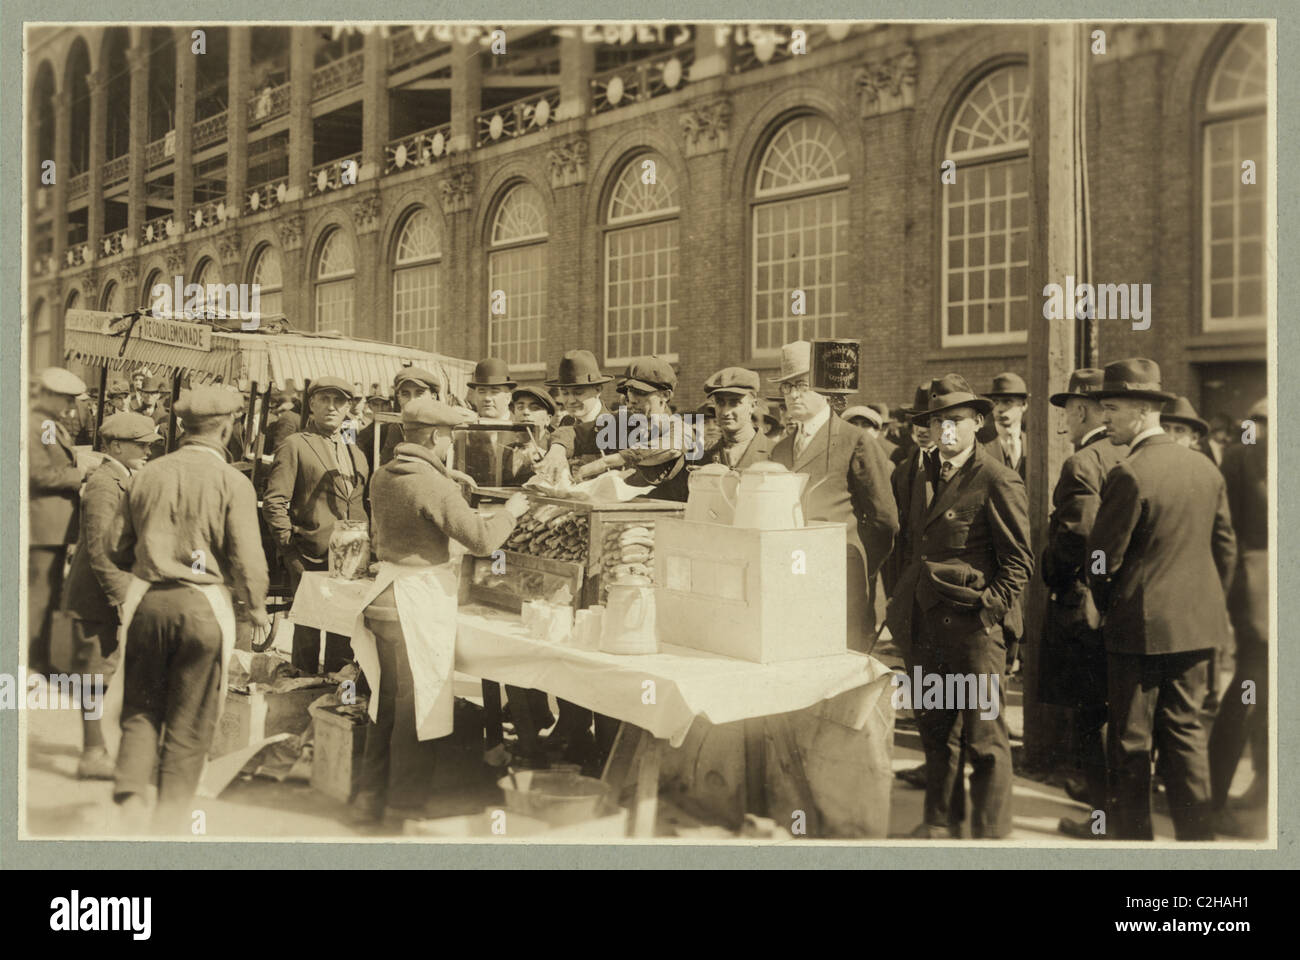 Baseball fans--'Hot dogs' for fans waiting for gates to open at Ebbets Field, Oct. 6, 1920 Stock Photo